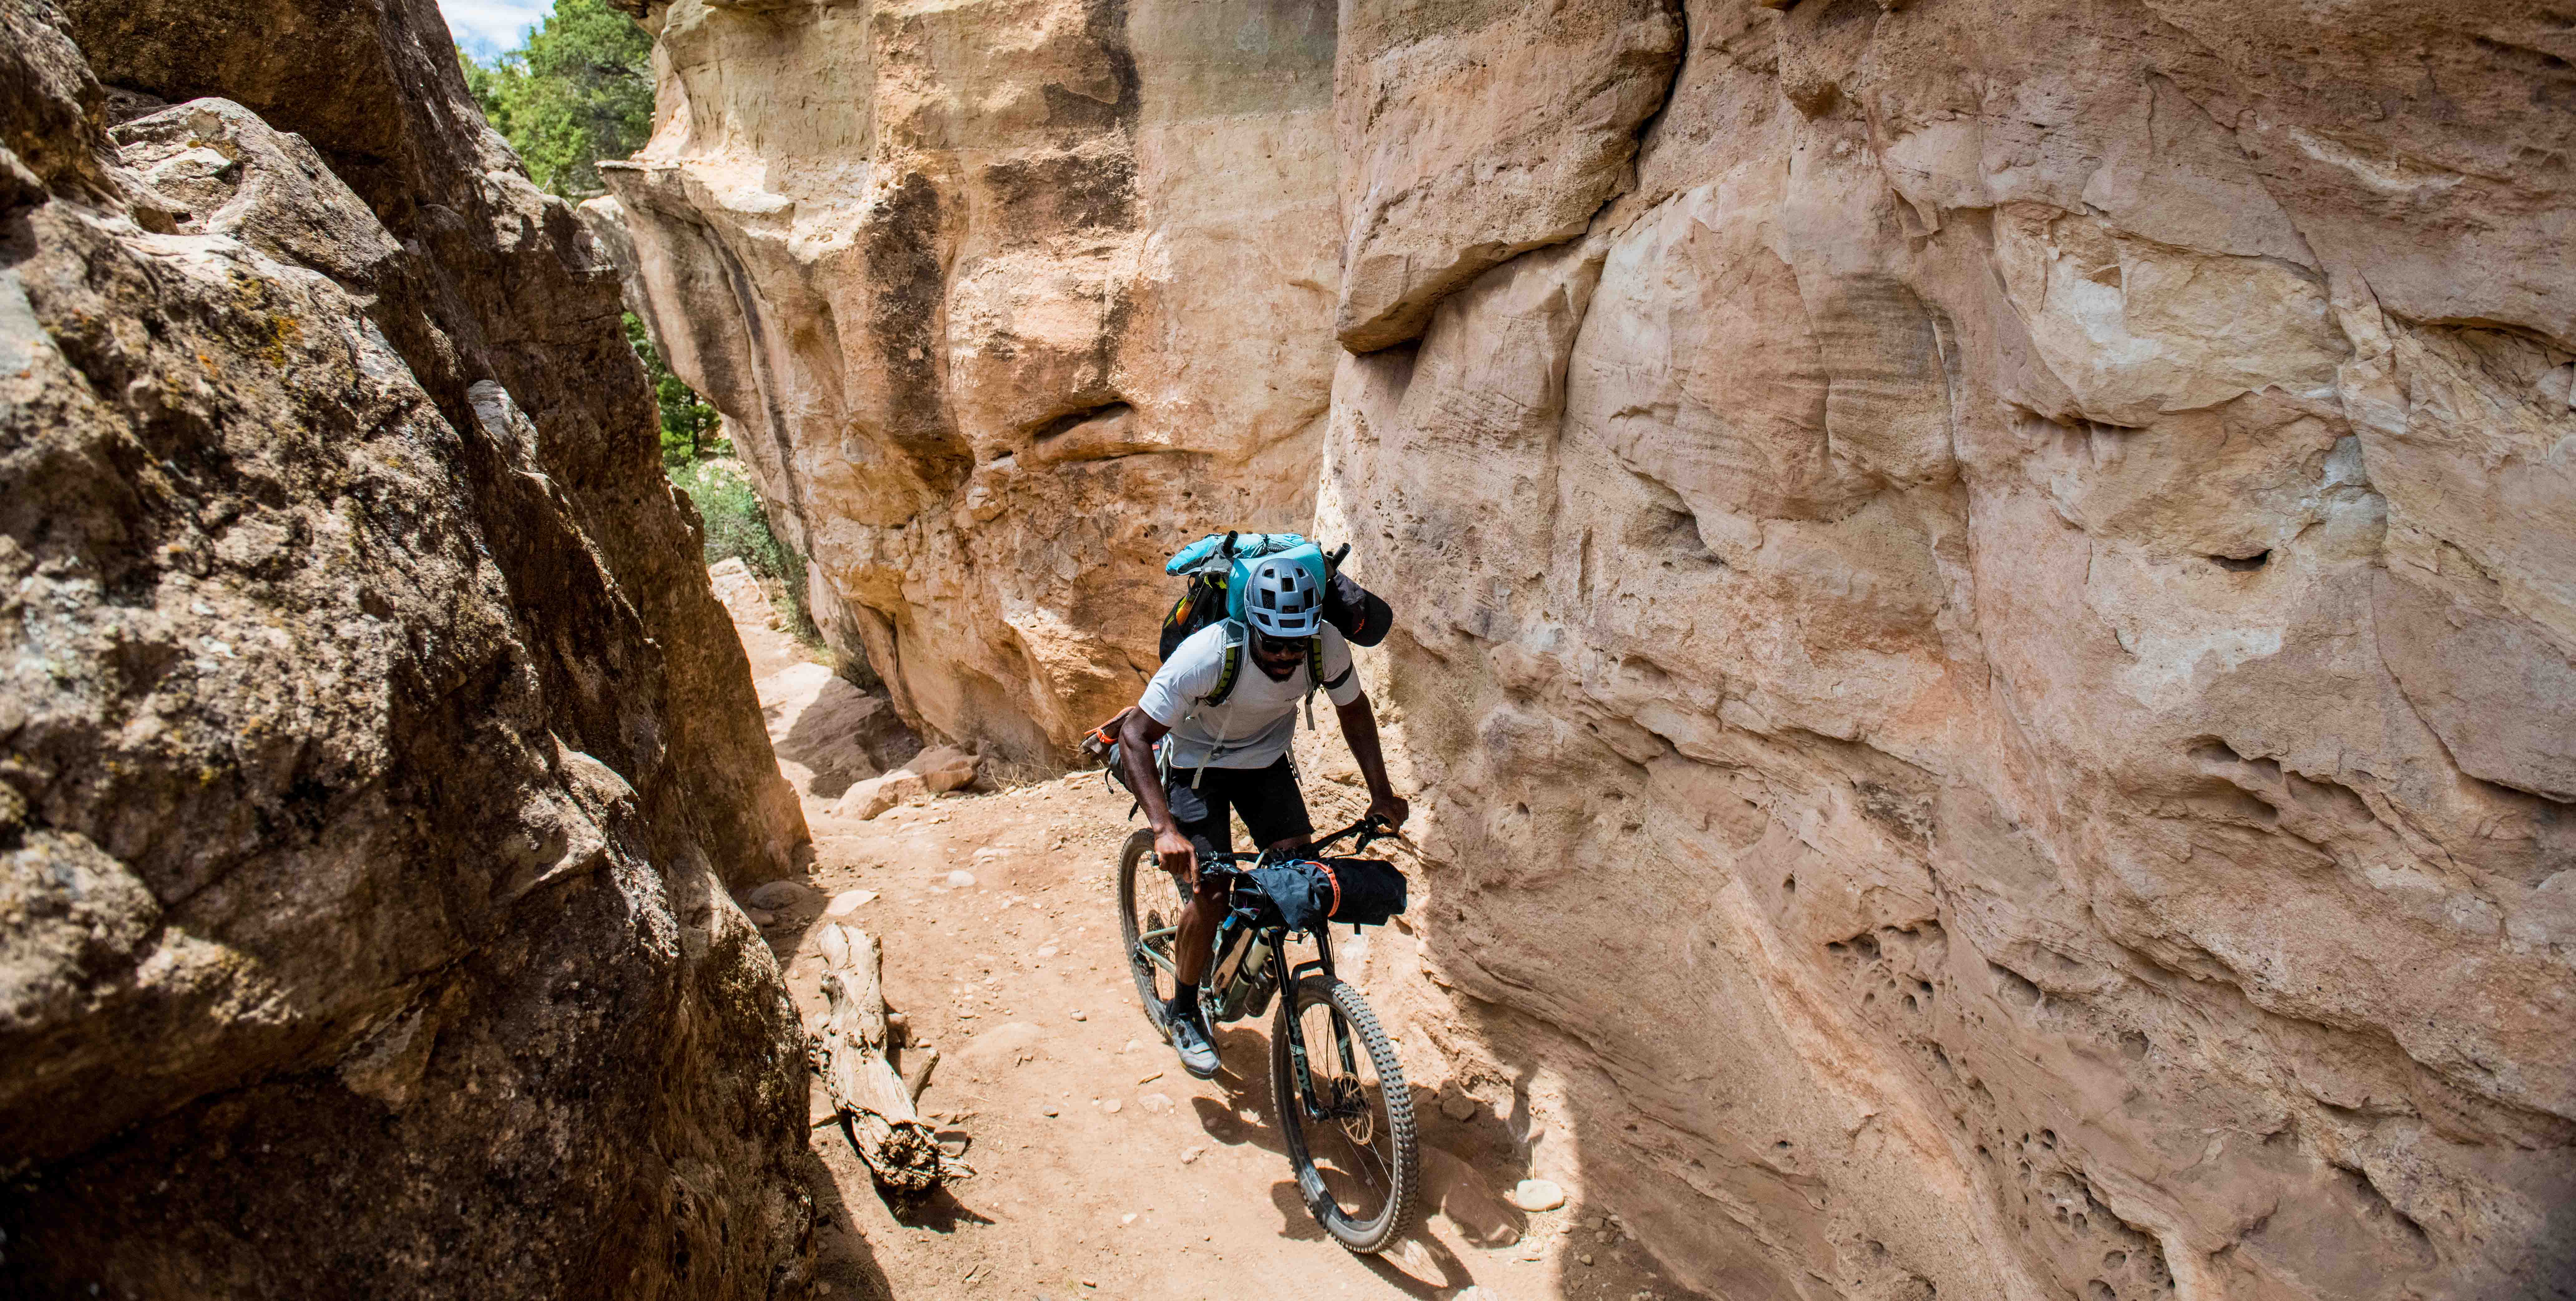 Mountain biker with packs and panniers riding through a slot canyon